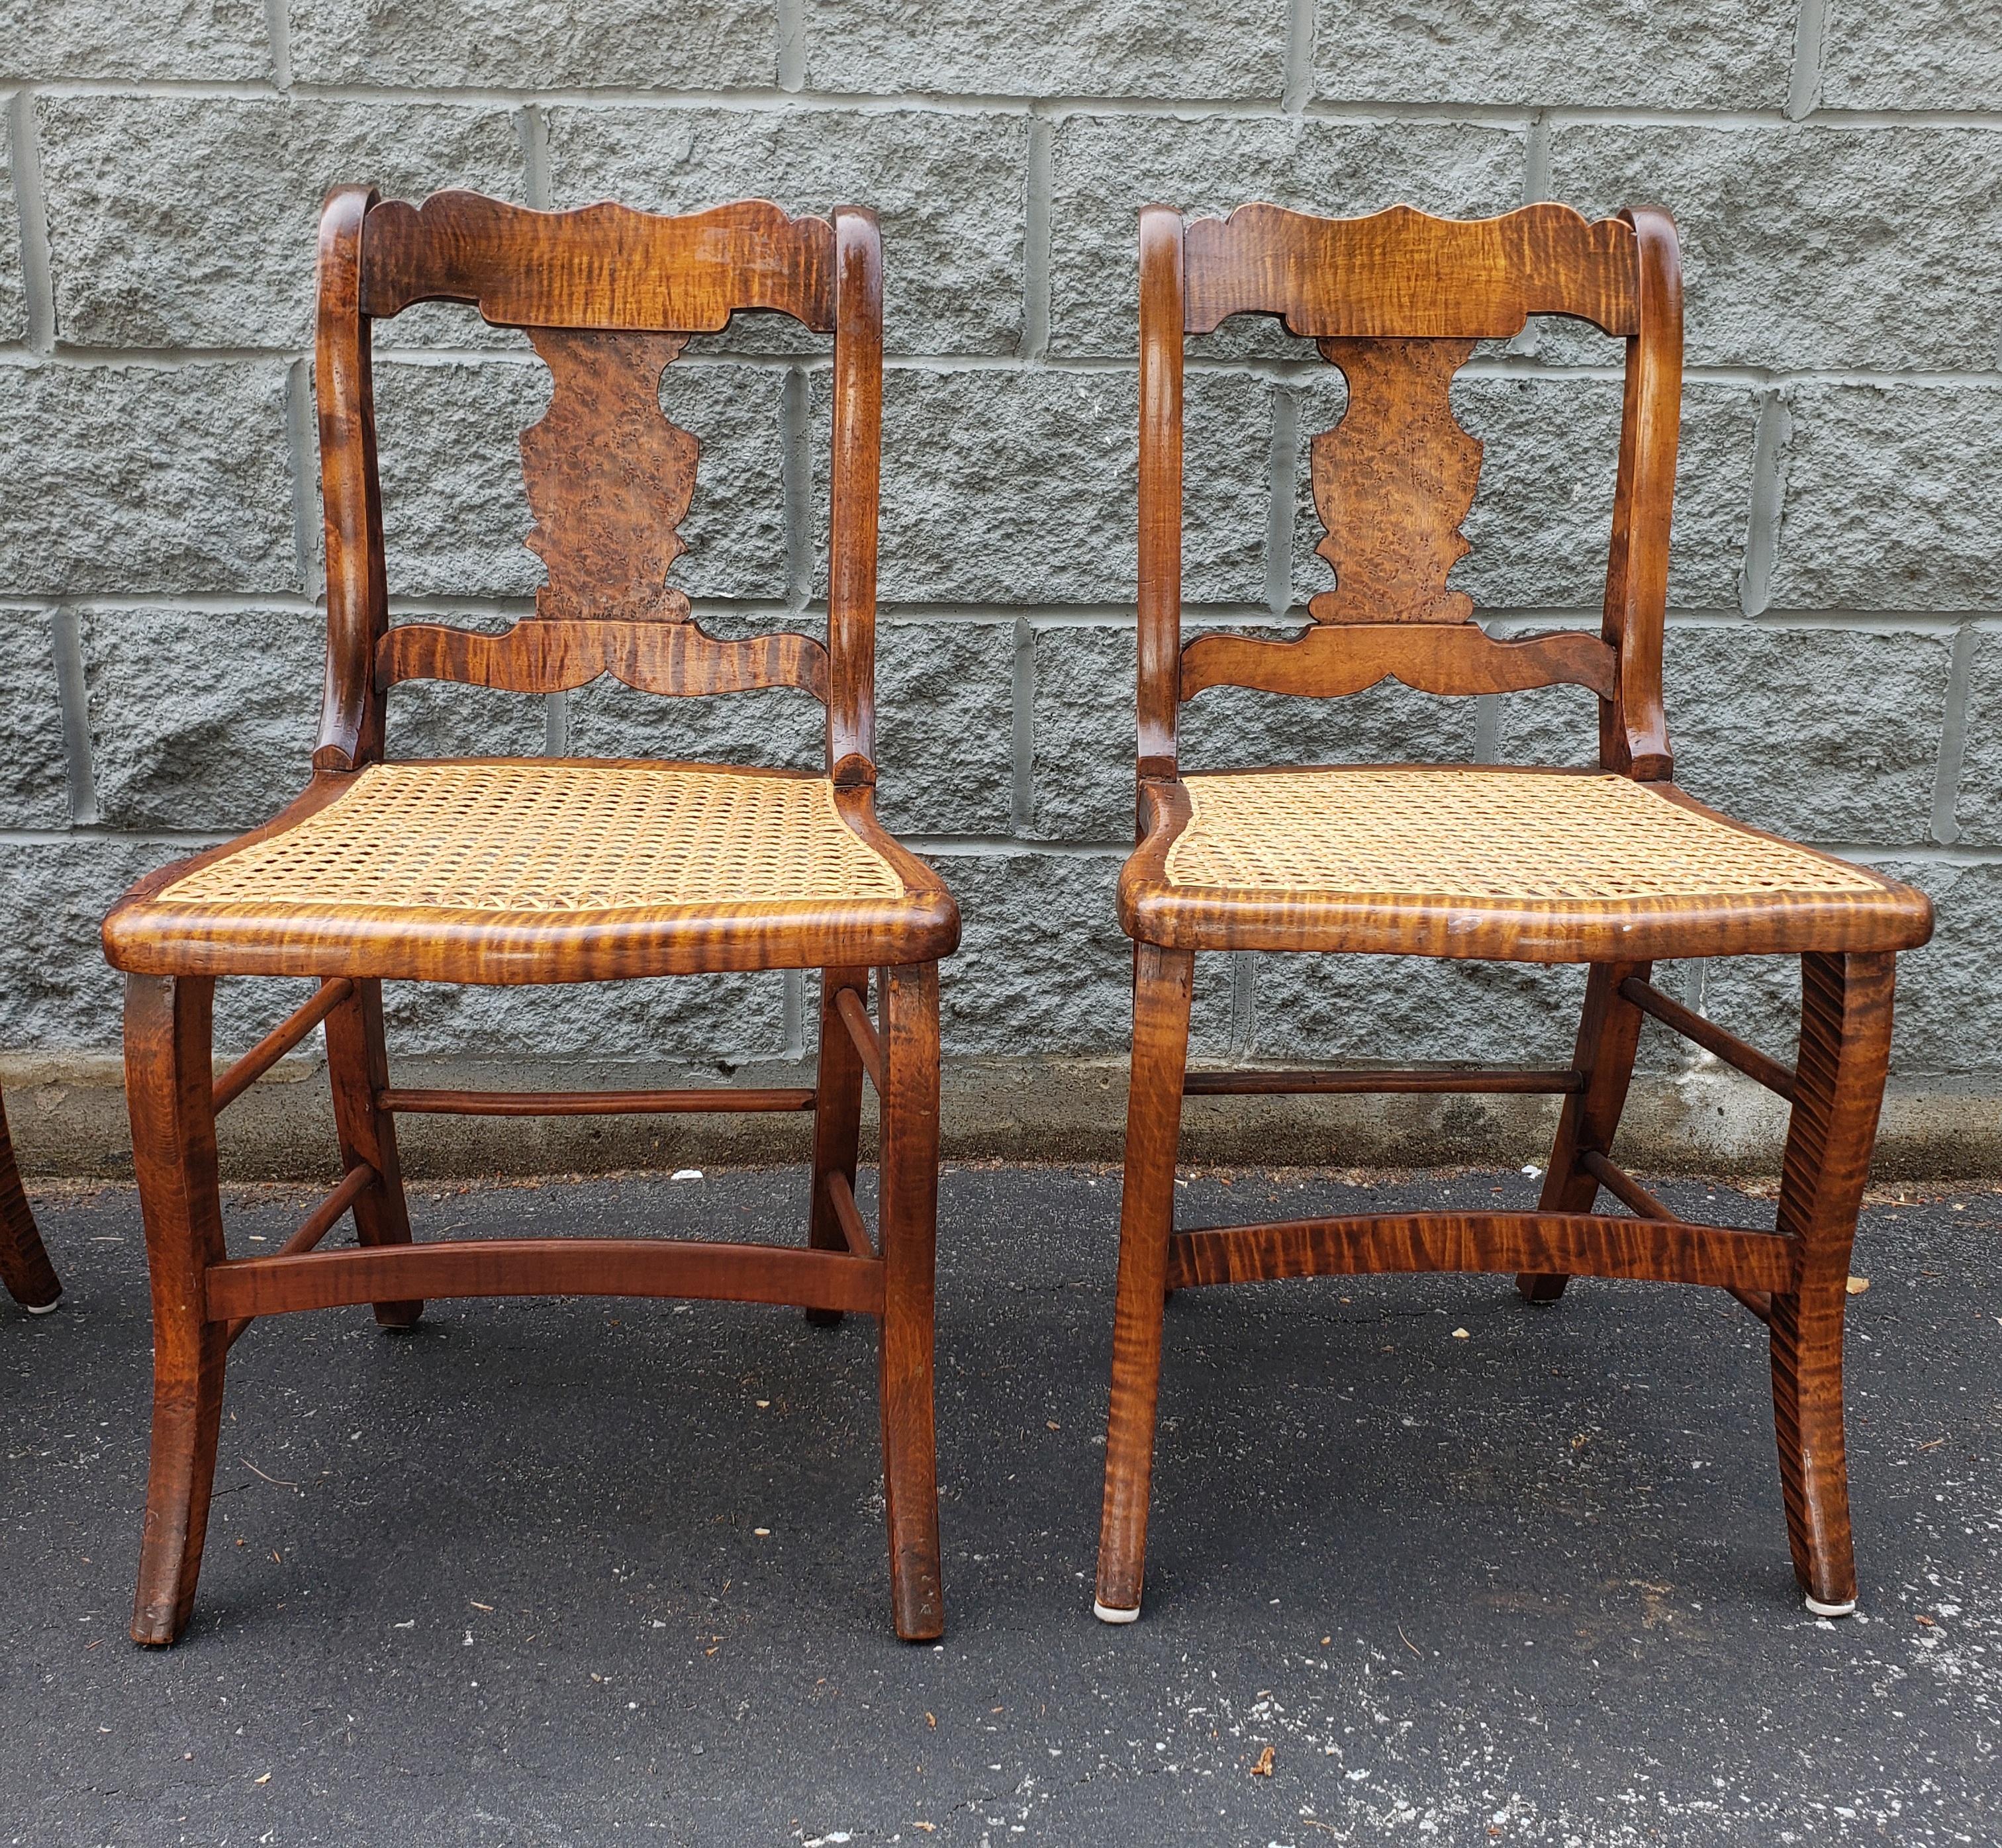 20th Century Early American Tiger Wood and Cane Seat Chairs, Set of 4 For Sale